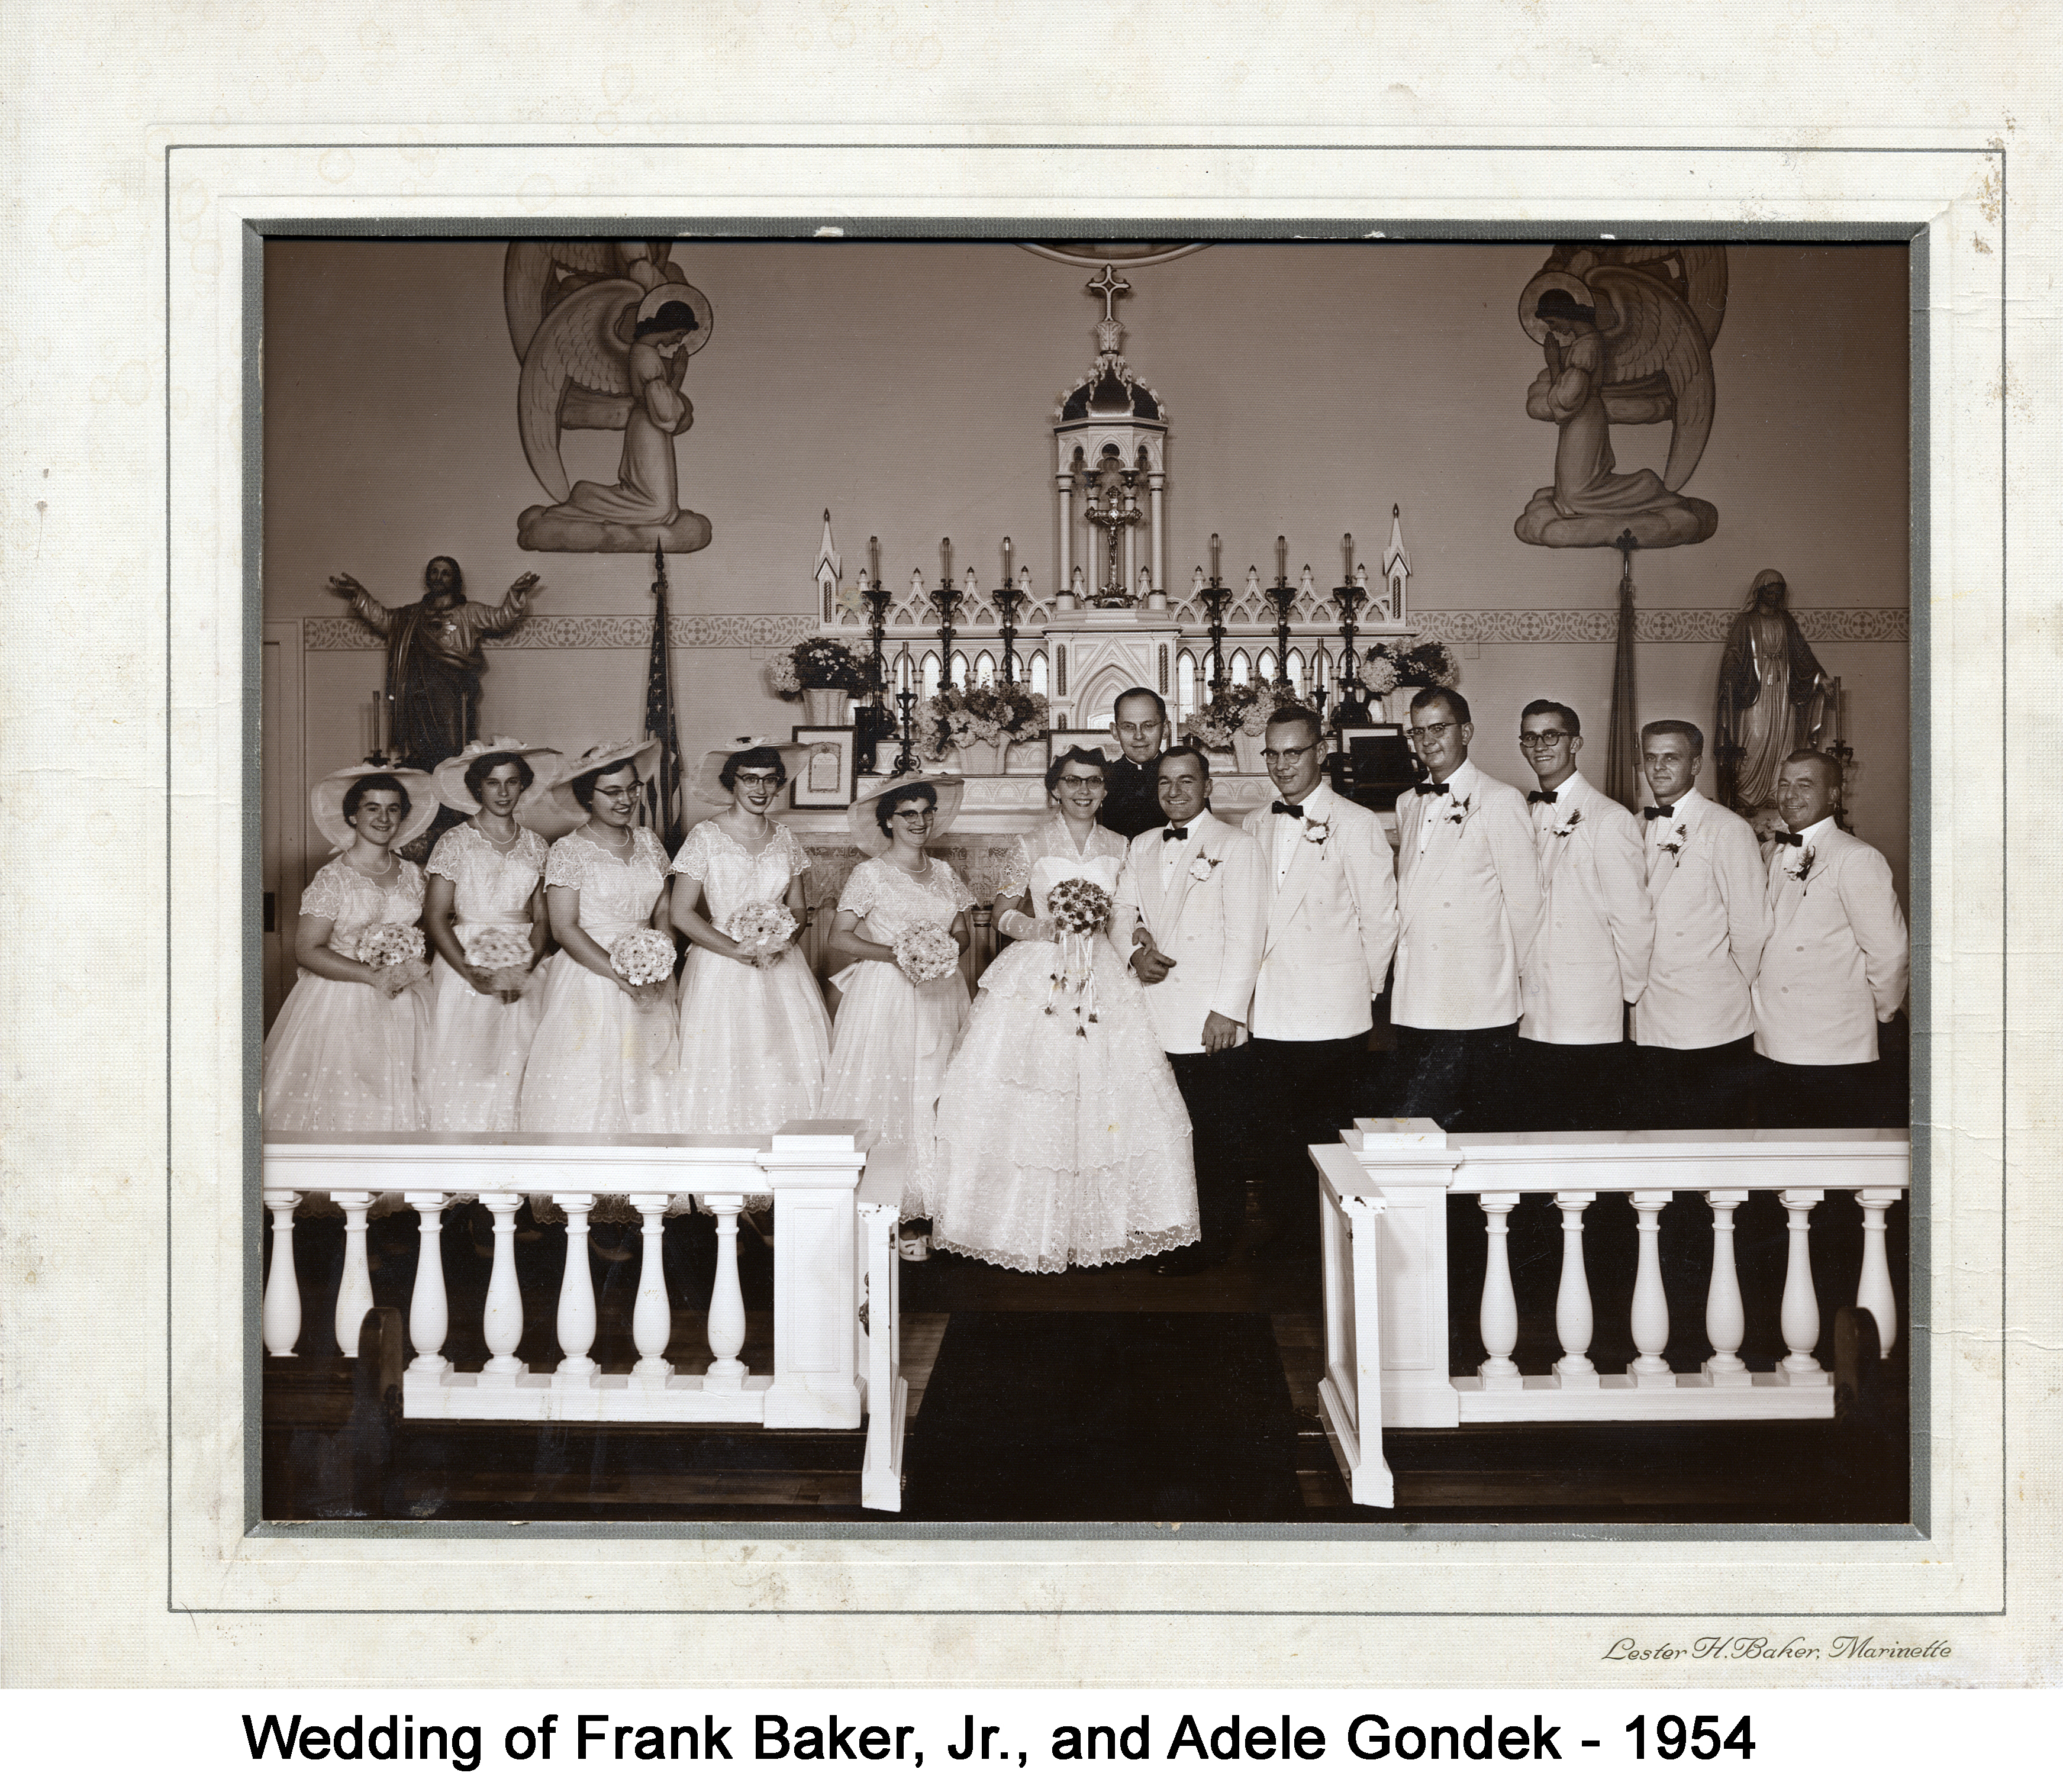 A large wedding party is standing in front of the altar with the priest standing
          behind them. The women all are in white dresses with large brimmed hats and the
          men are in white jackets.